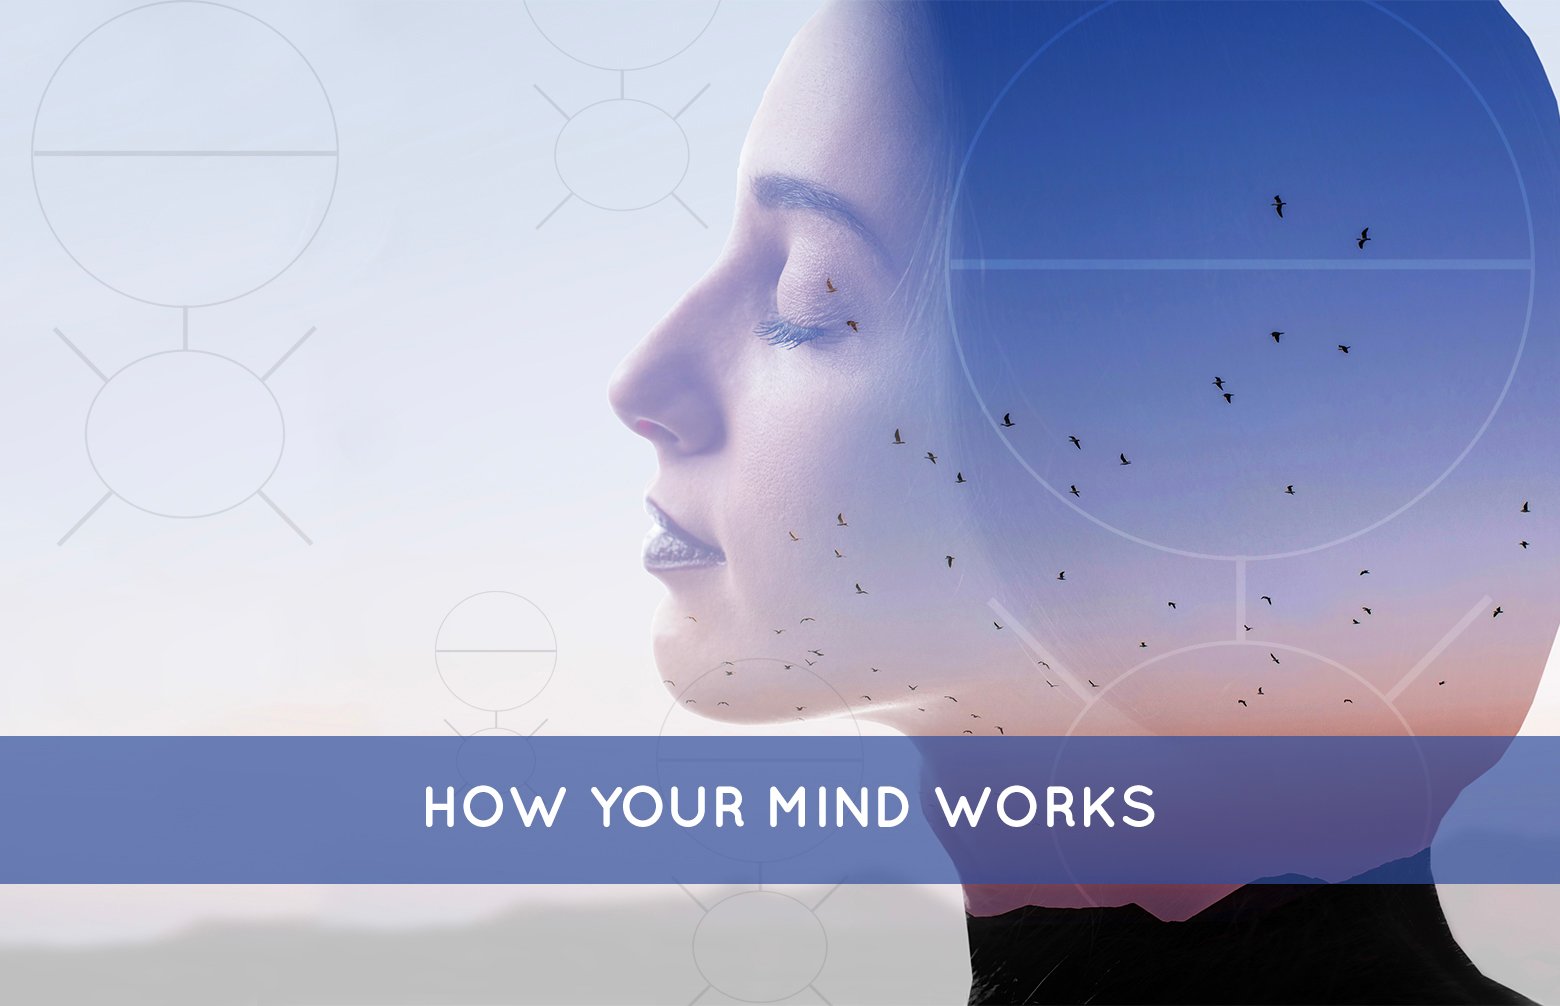 How Your Mind Works - Proctor Gallagher